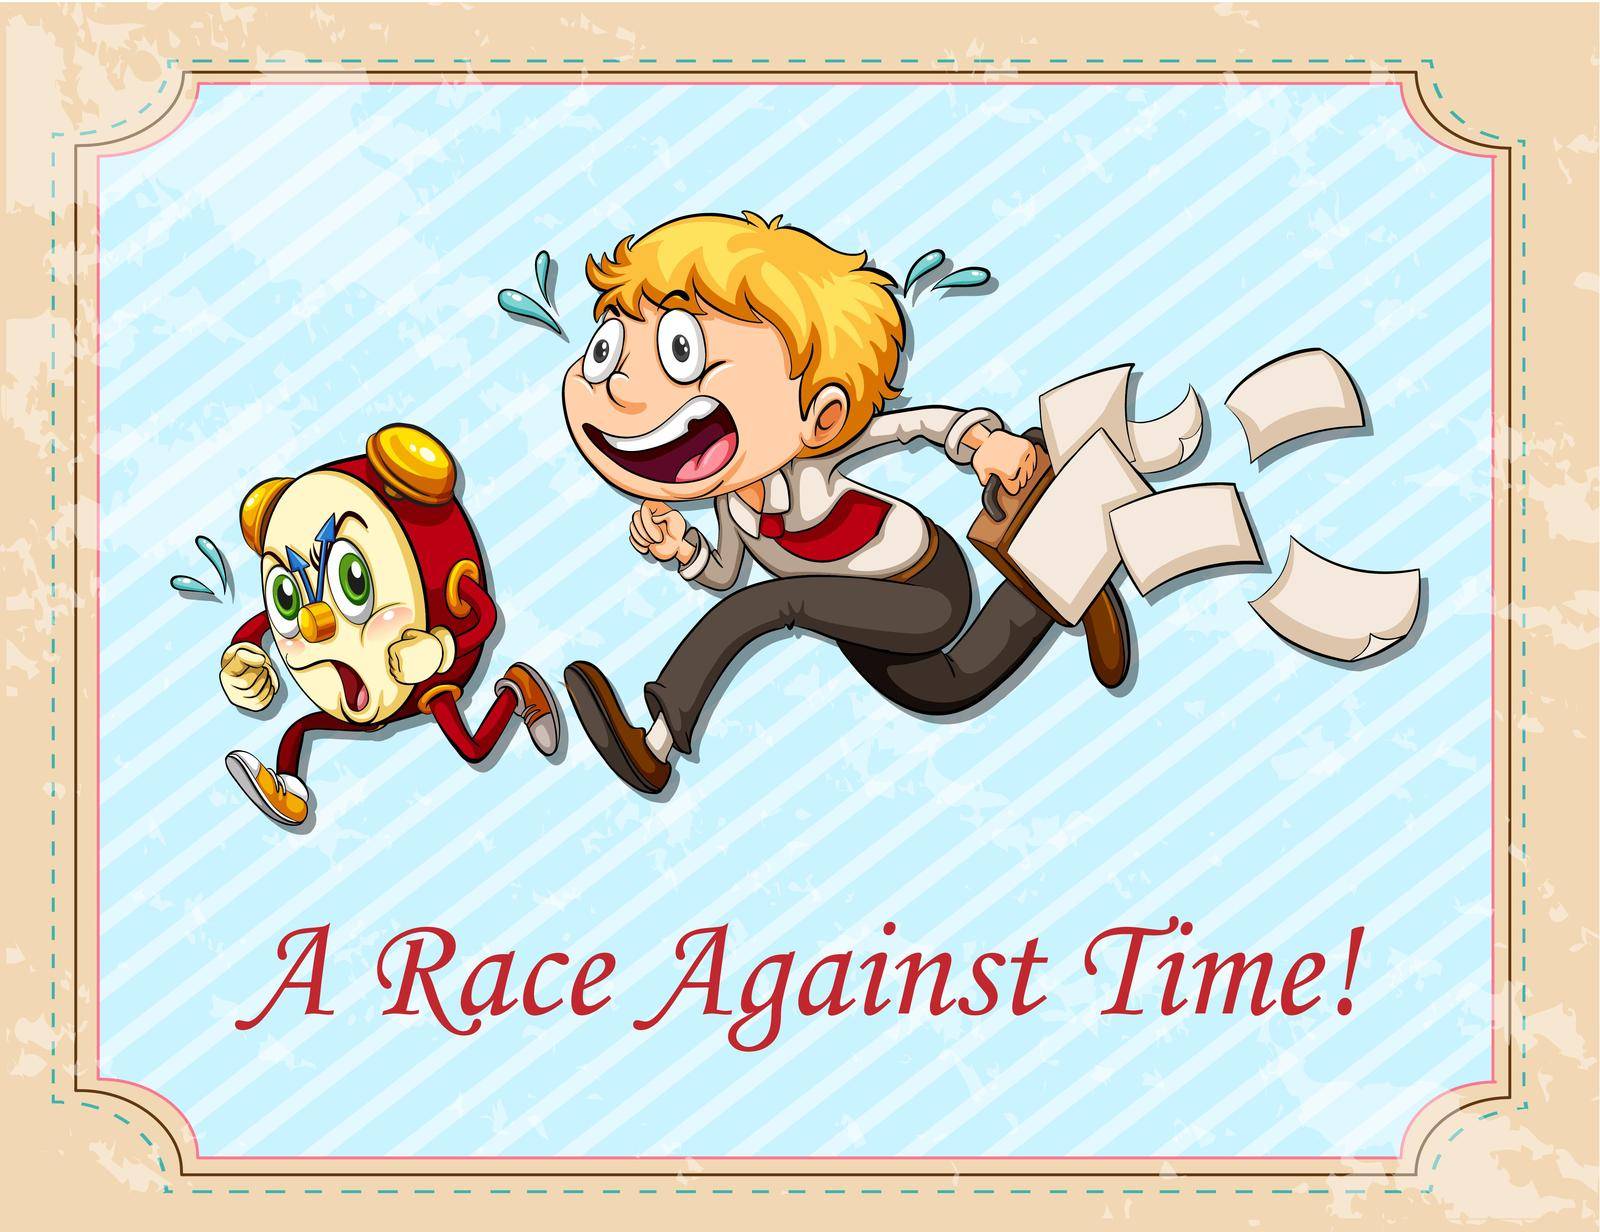 A race against time illustration